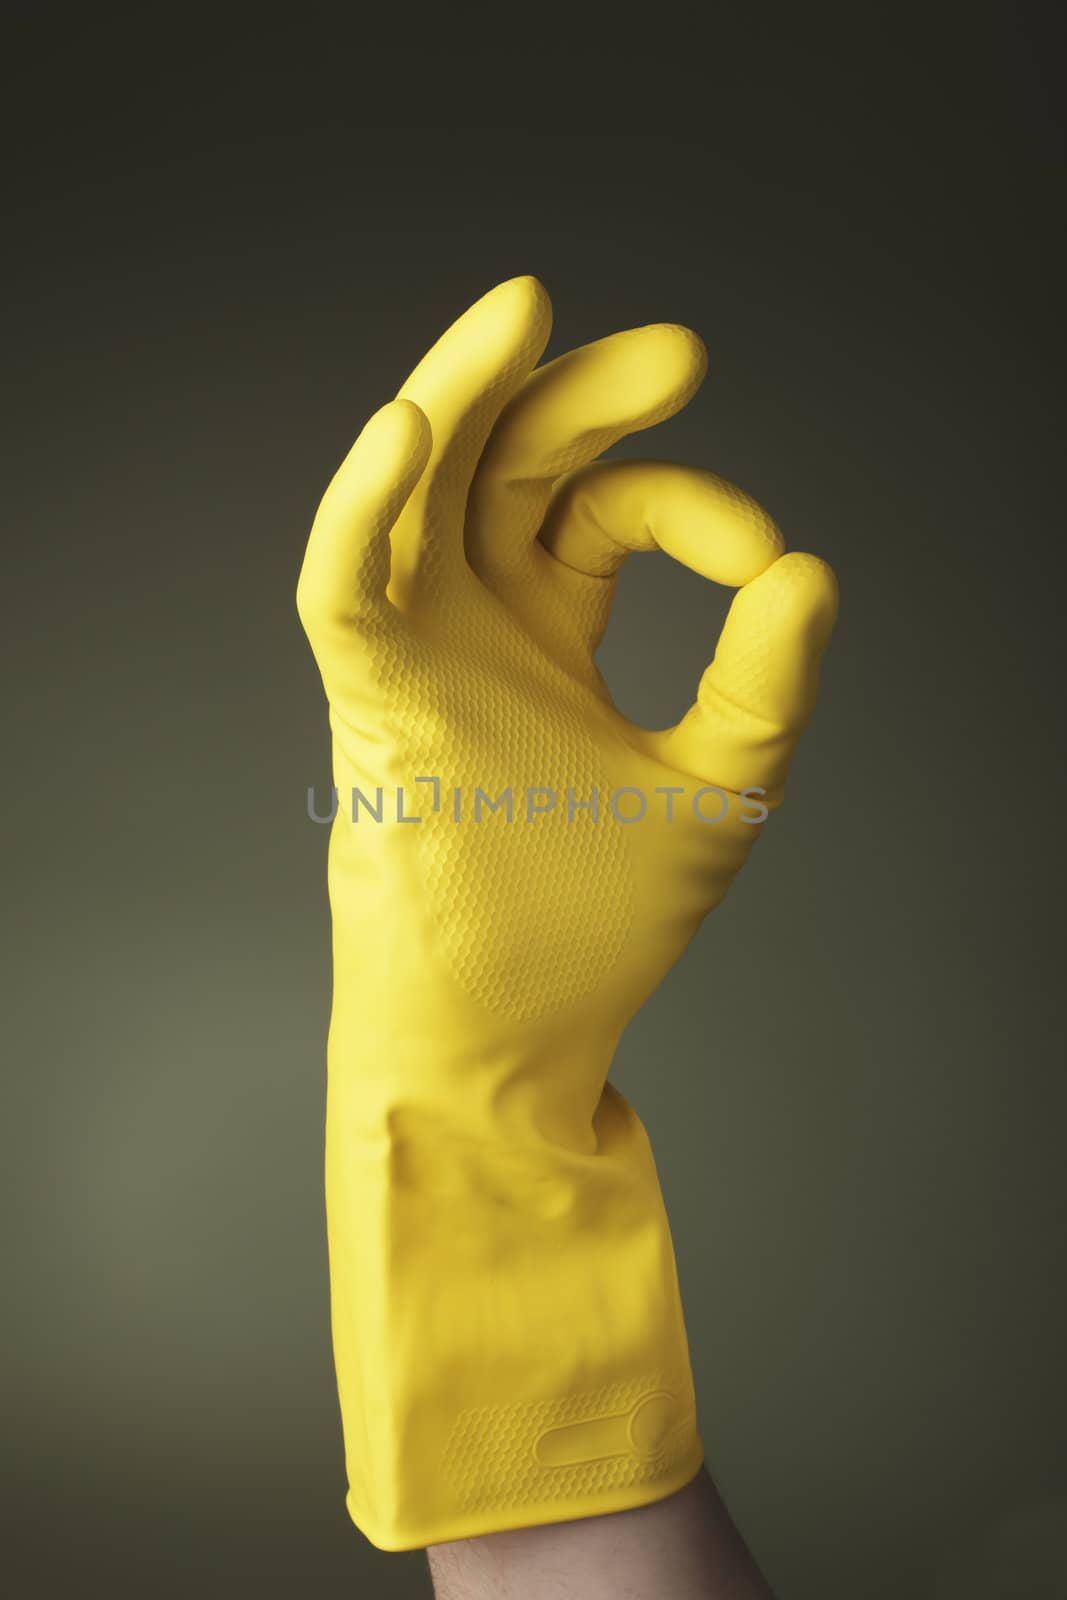 A hand wearing a protective glove doing "ok" sign